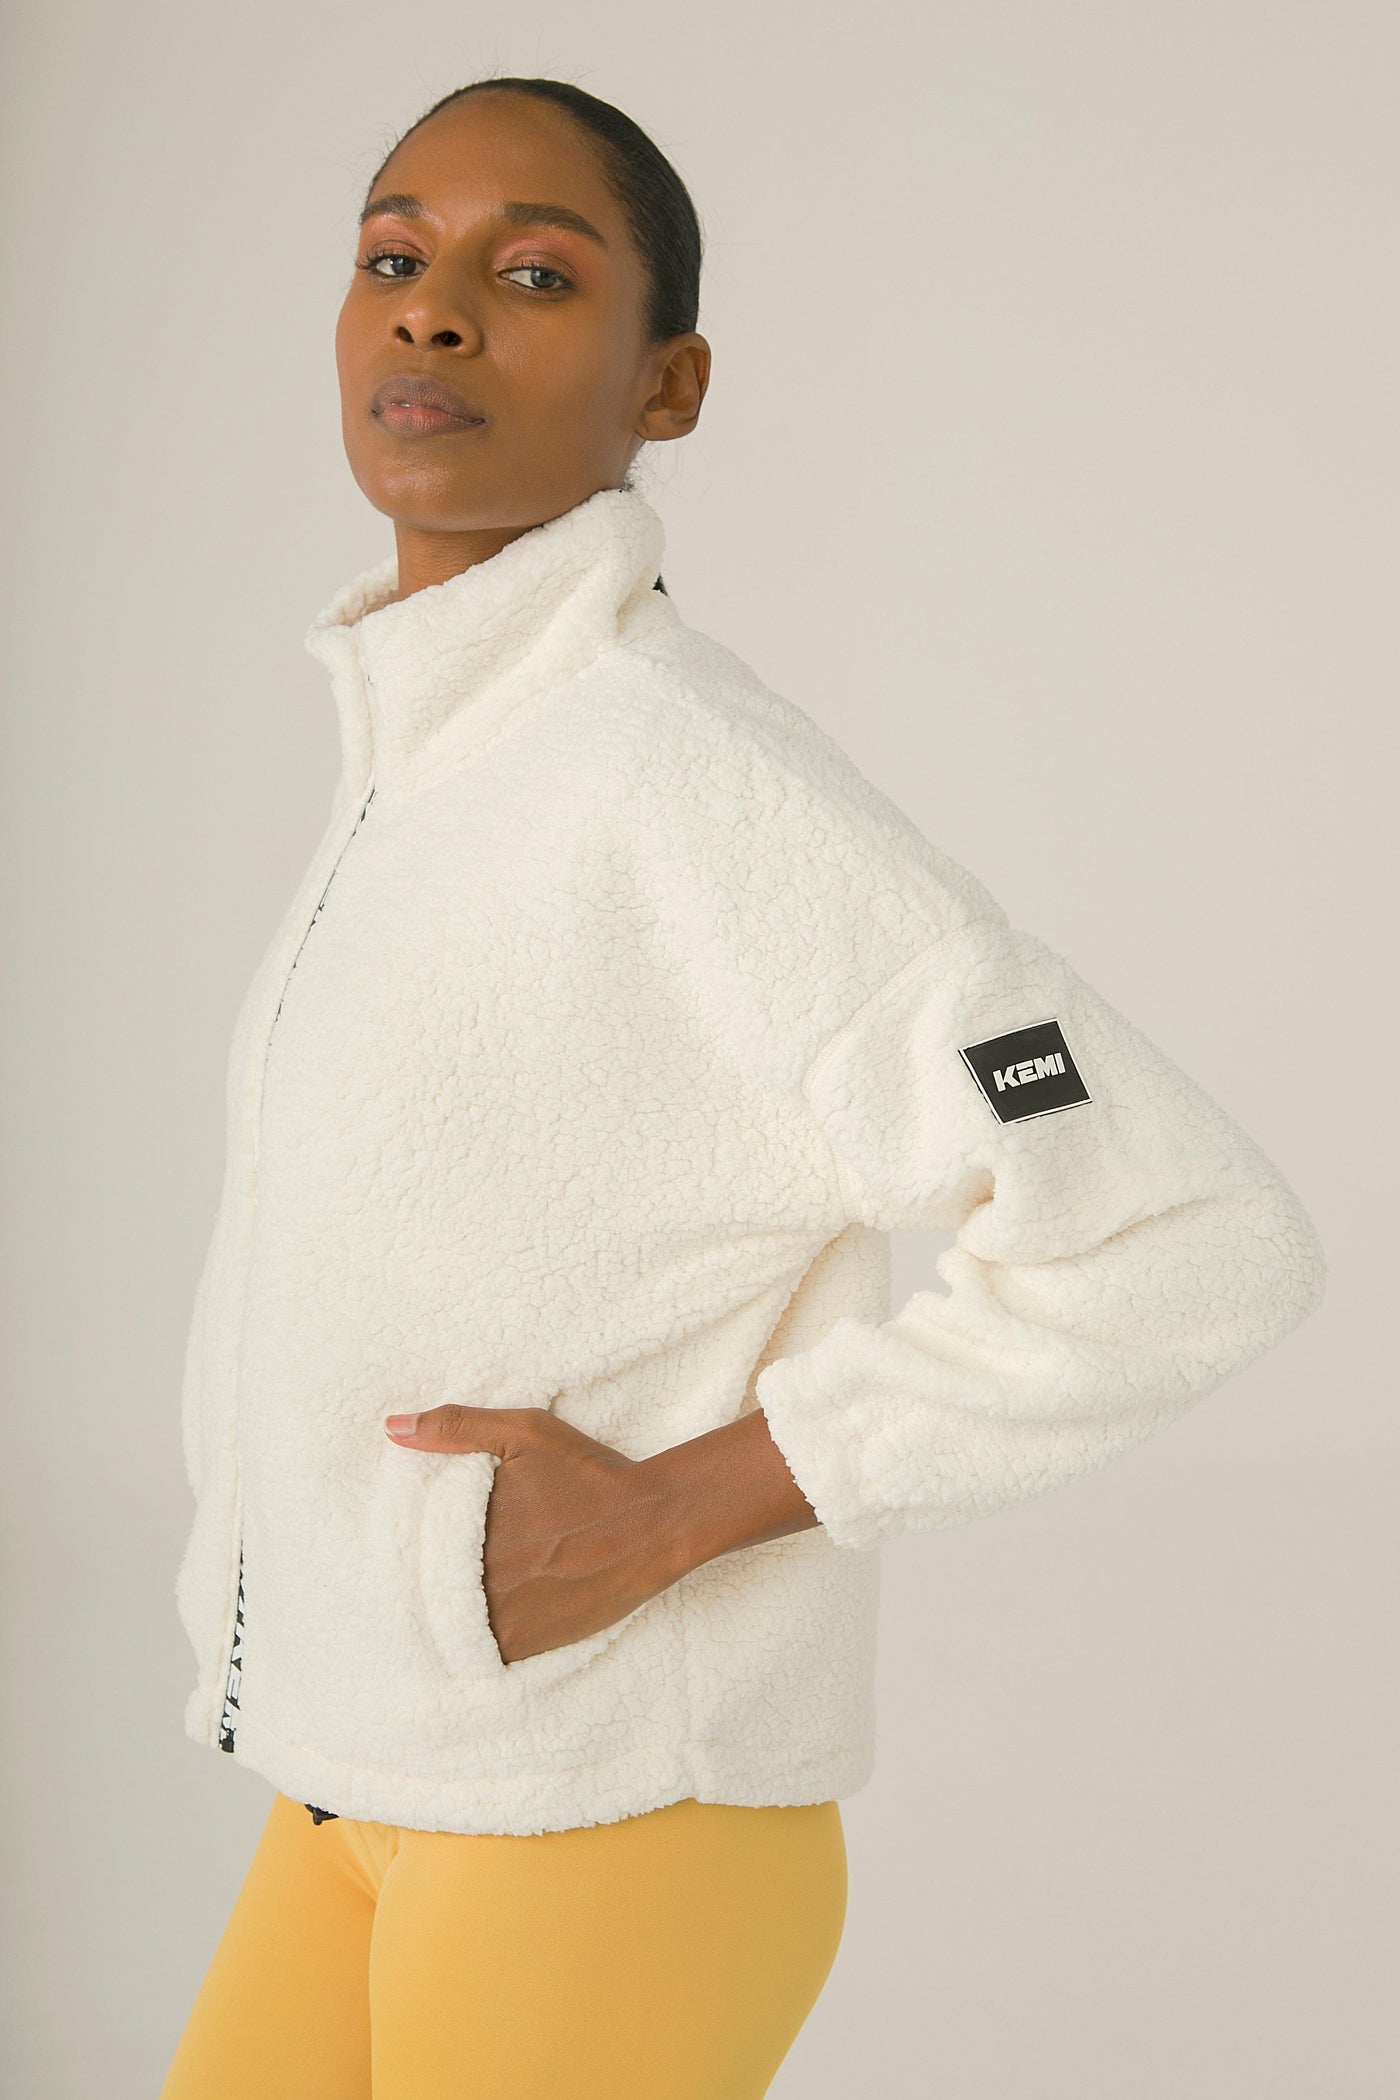 TOPSPIN SHERPA JACKET IN WHITE - Kemi Active